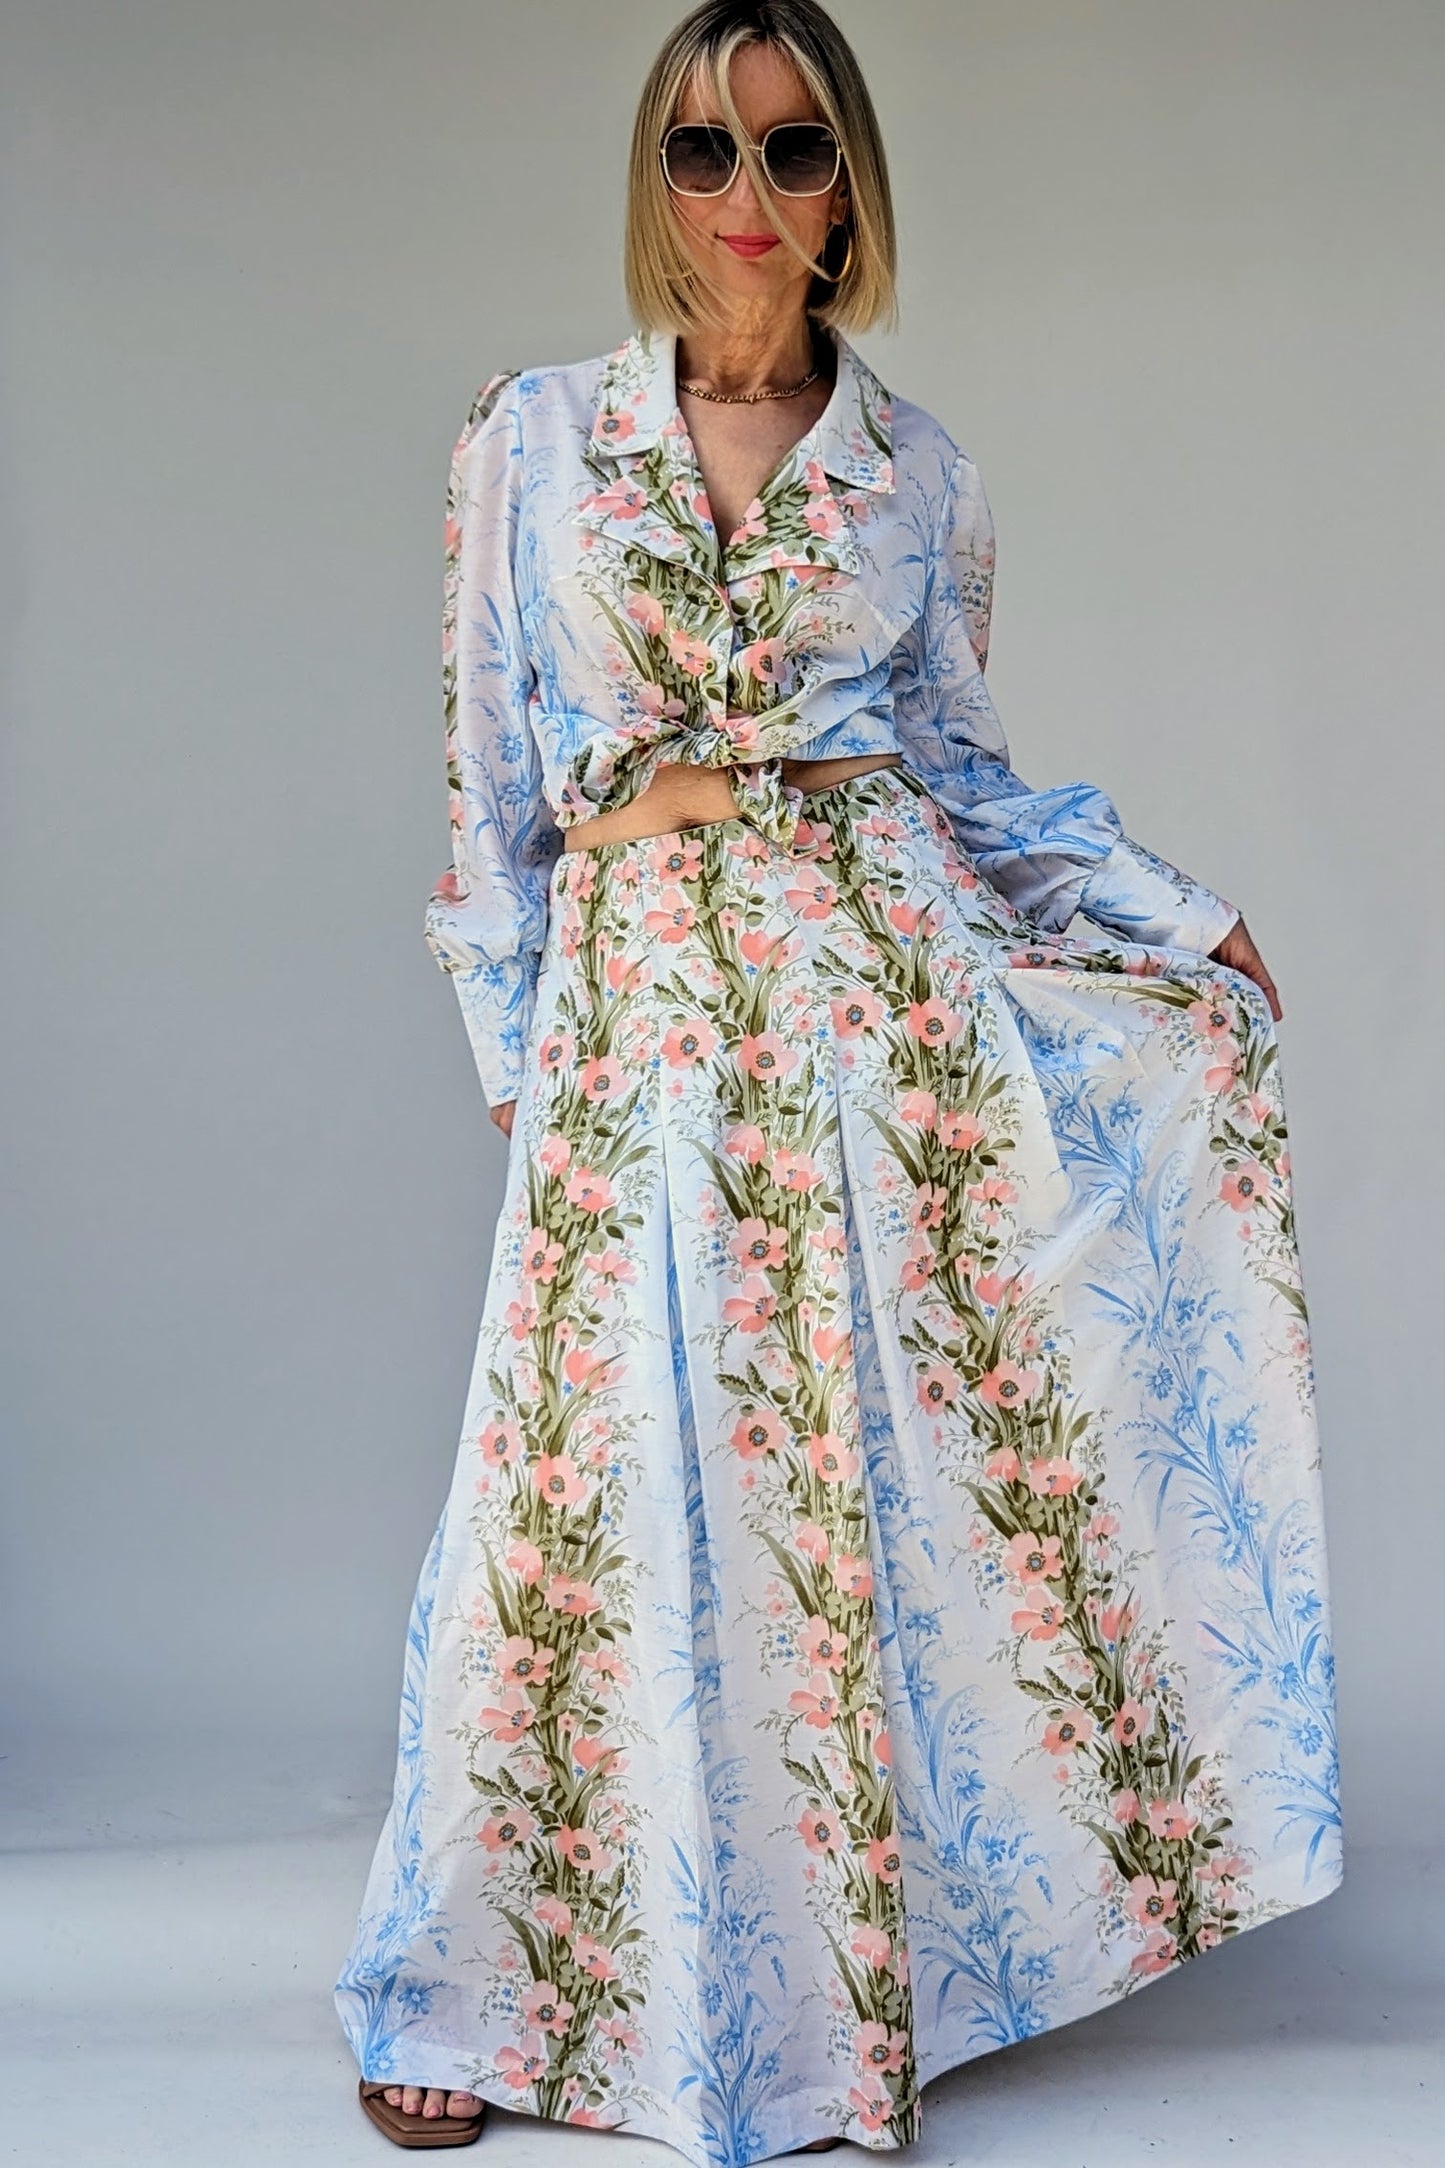 70s vintage two piece floral skirt summer suit with long sleeve blouse and maxi skirt in pinks and blues on white